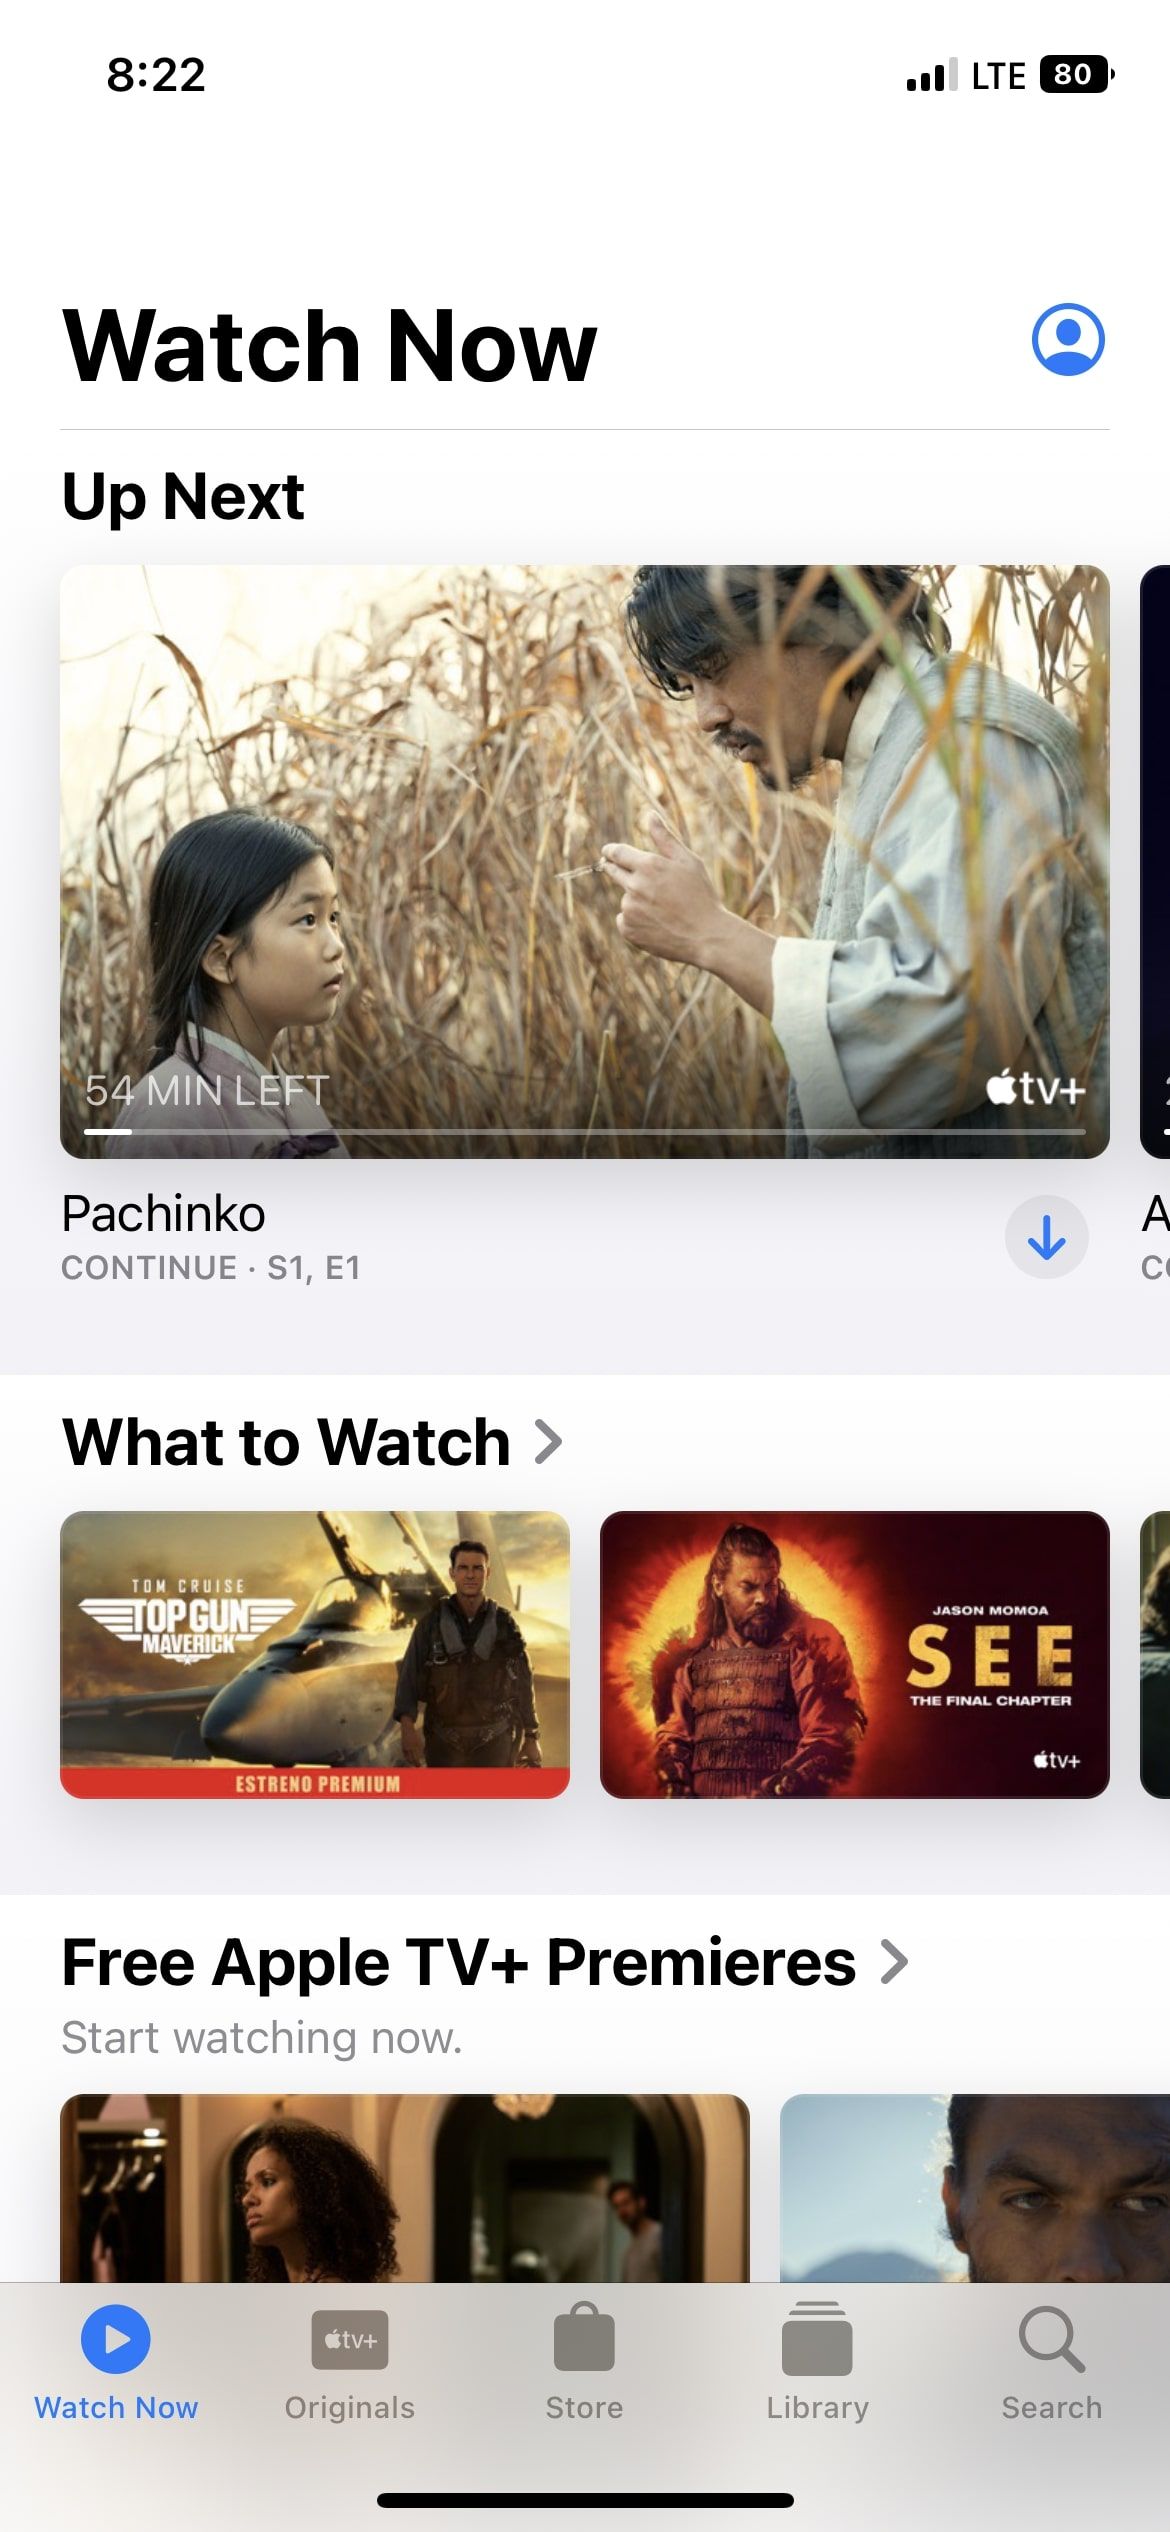 Apple TV+ iOS app Watch Now page